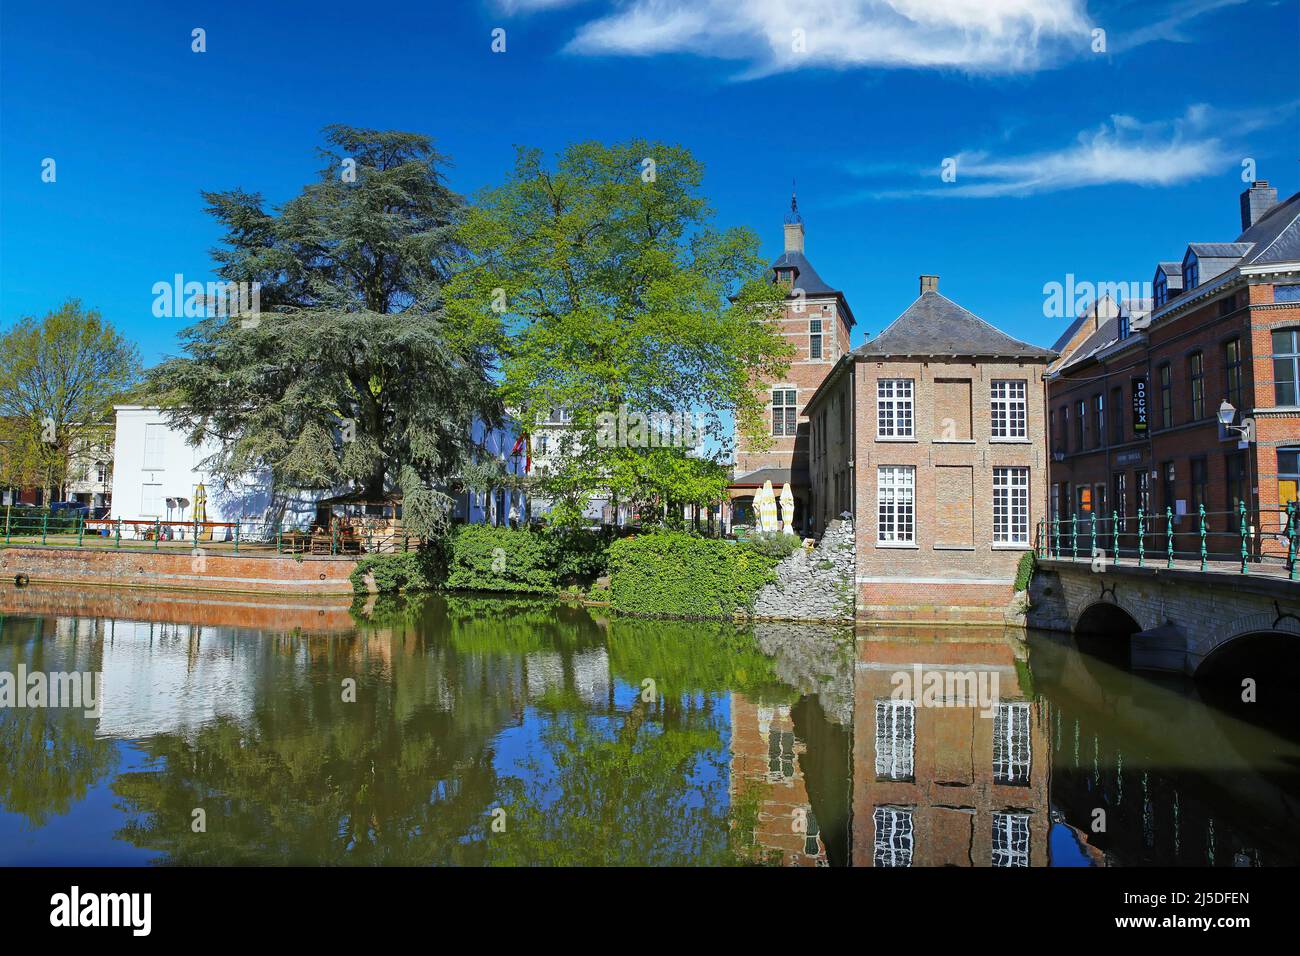 Lier, Belgium - April 9. 2022: View over idyllic romantic water town moat on medieval houses, green trees park, blue sky Stock Photo